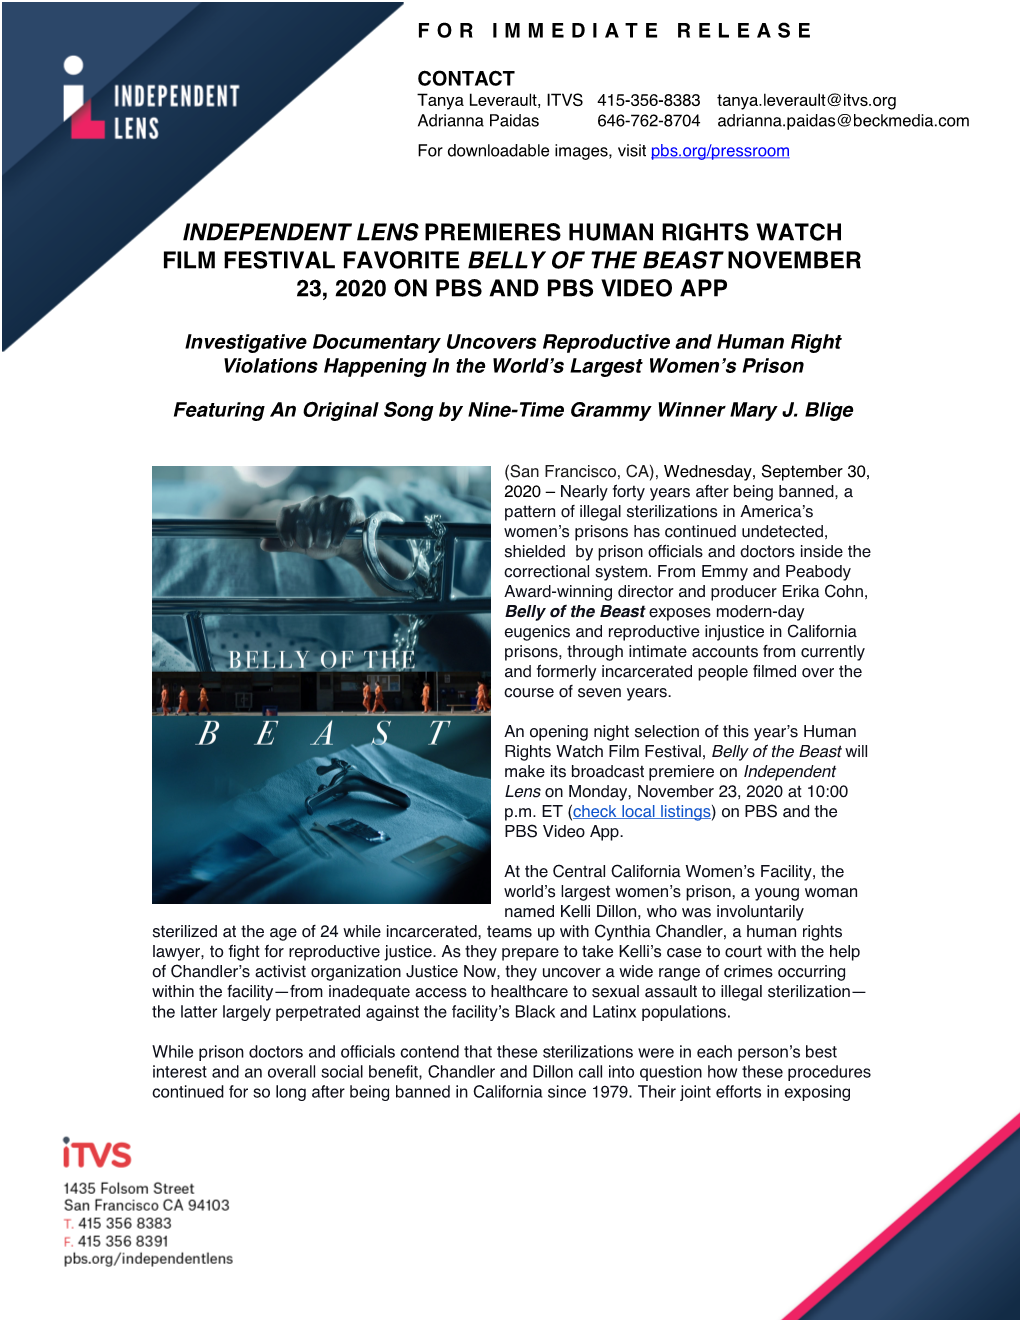 Independent Lens Premieres Human Rights Watch Film Festival Favorite Belly of the Beast November 23, 2020 on Pbs and Pbs Video App